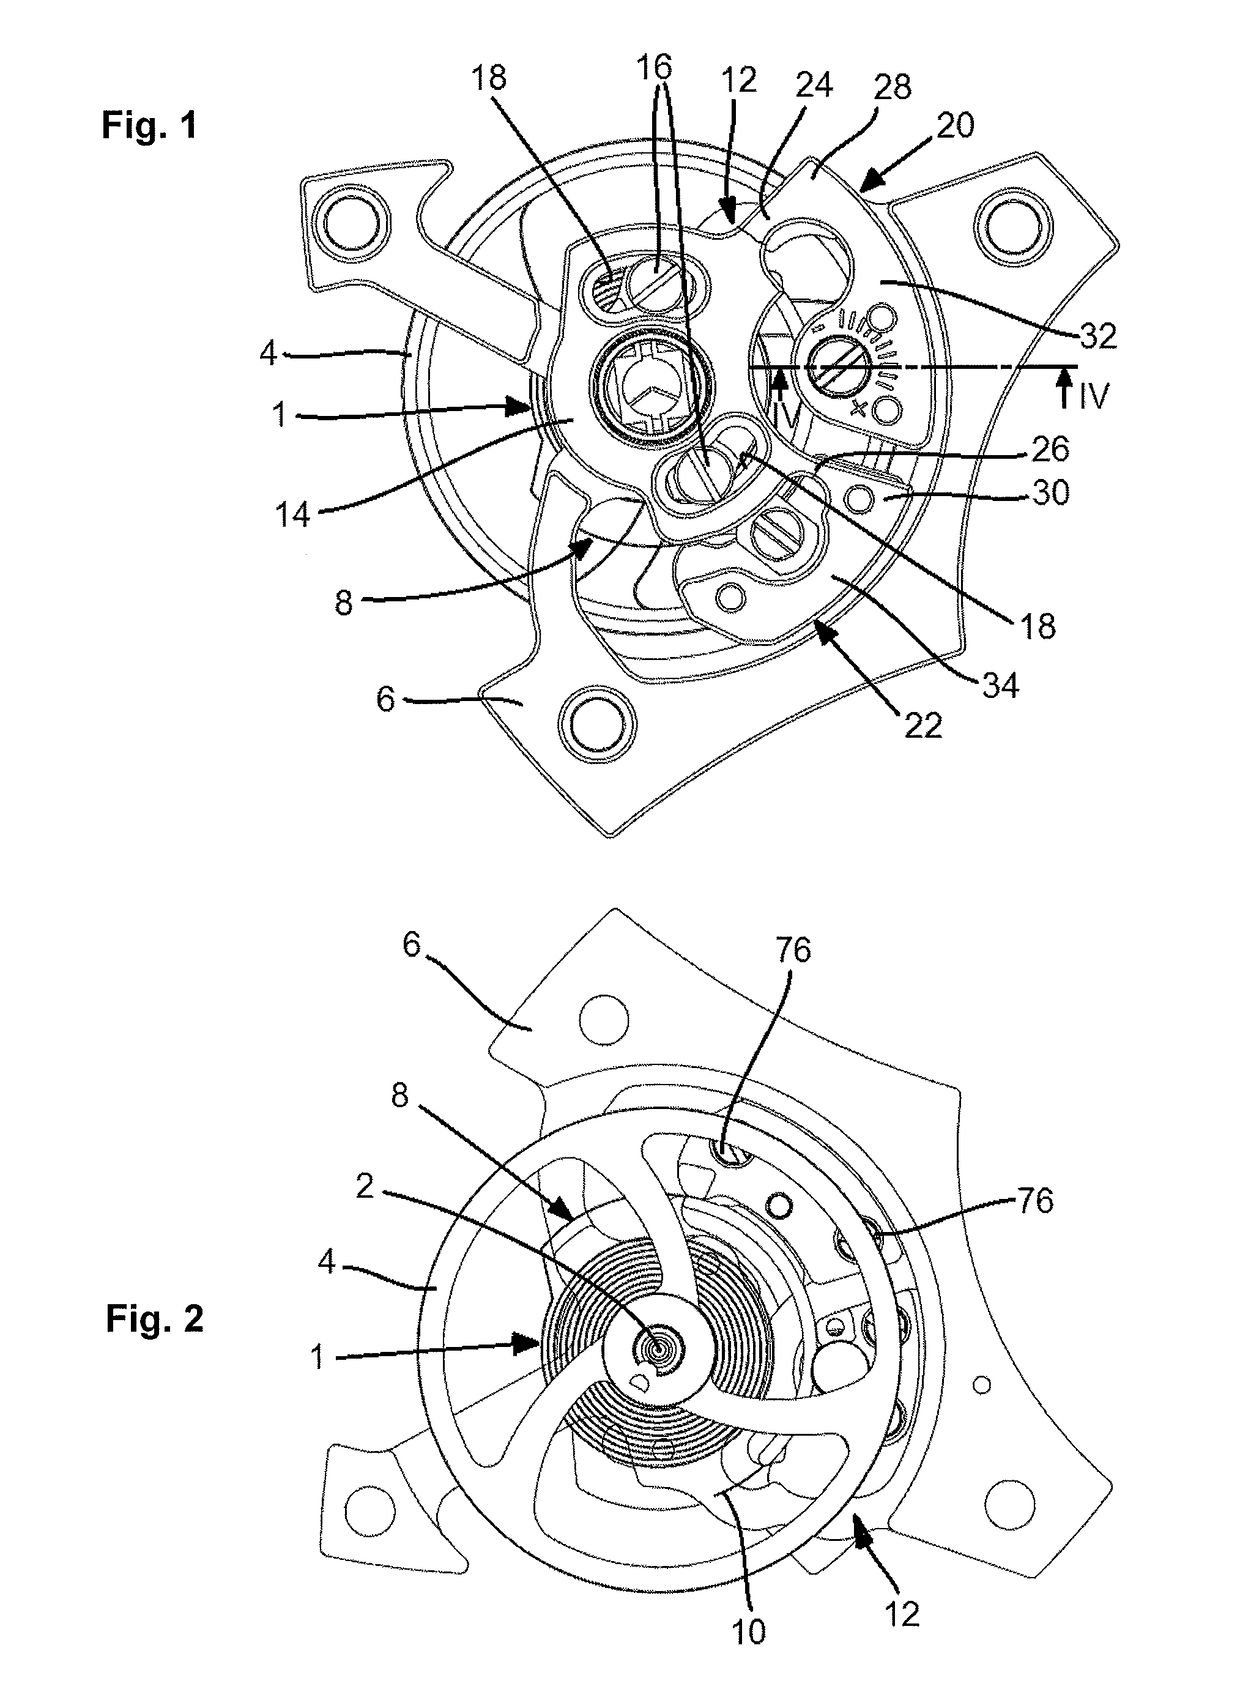 Device for assembling and adjusting a balance spring